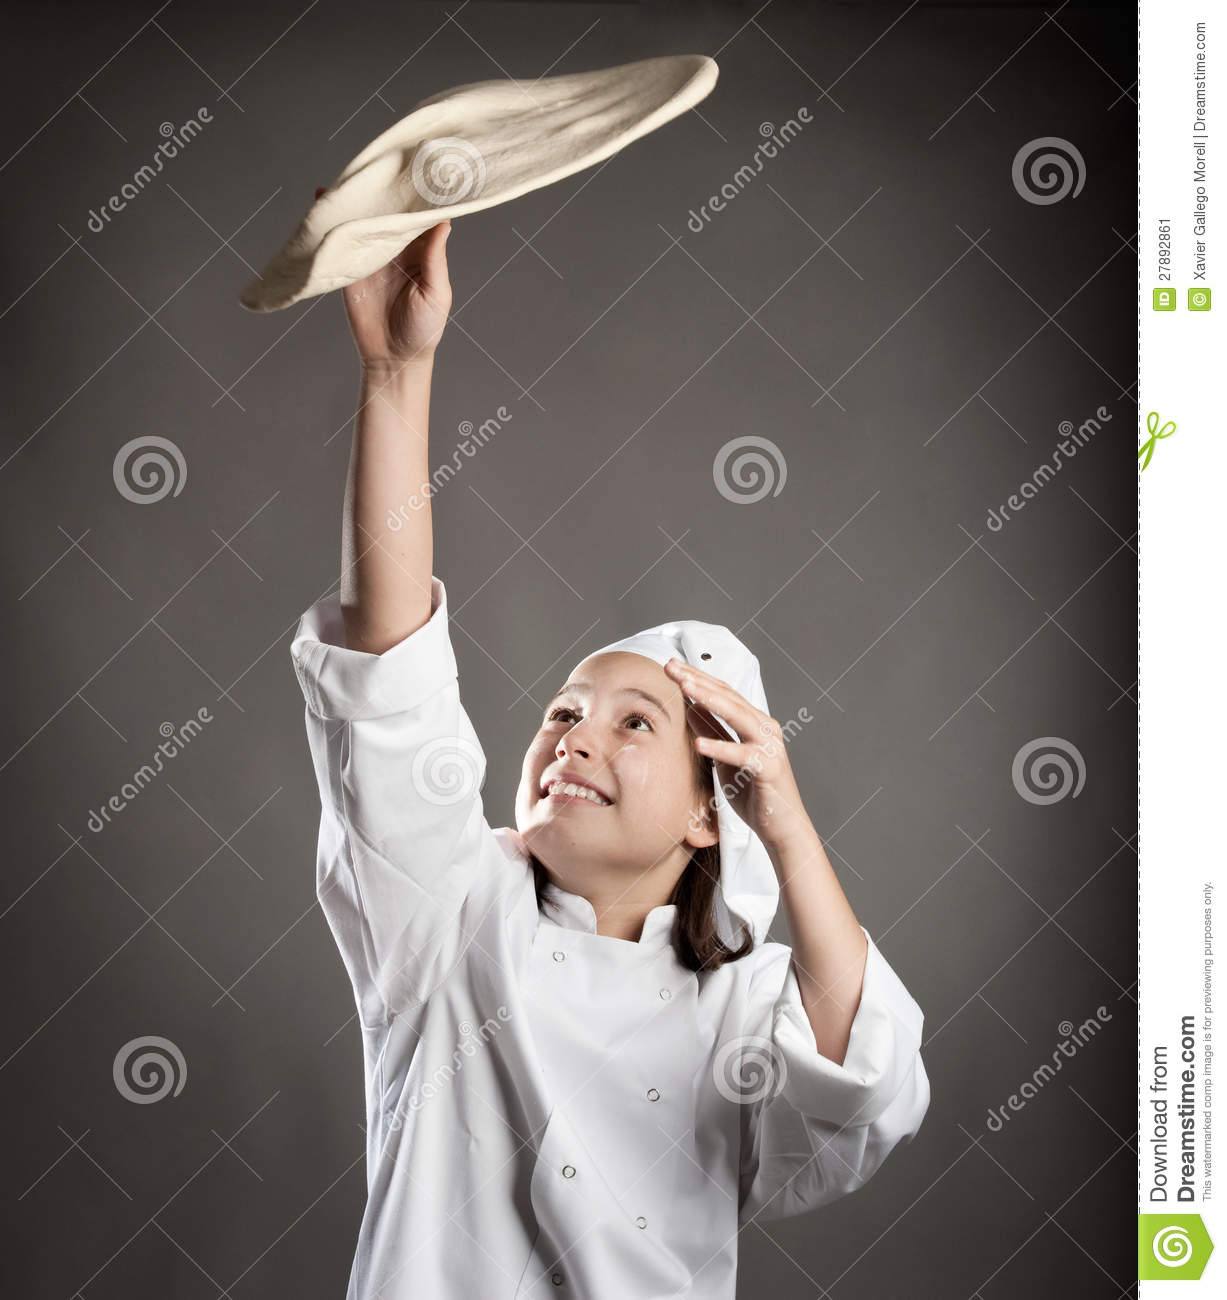 Chef Working The Dough Stock Image   Image  27892861